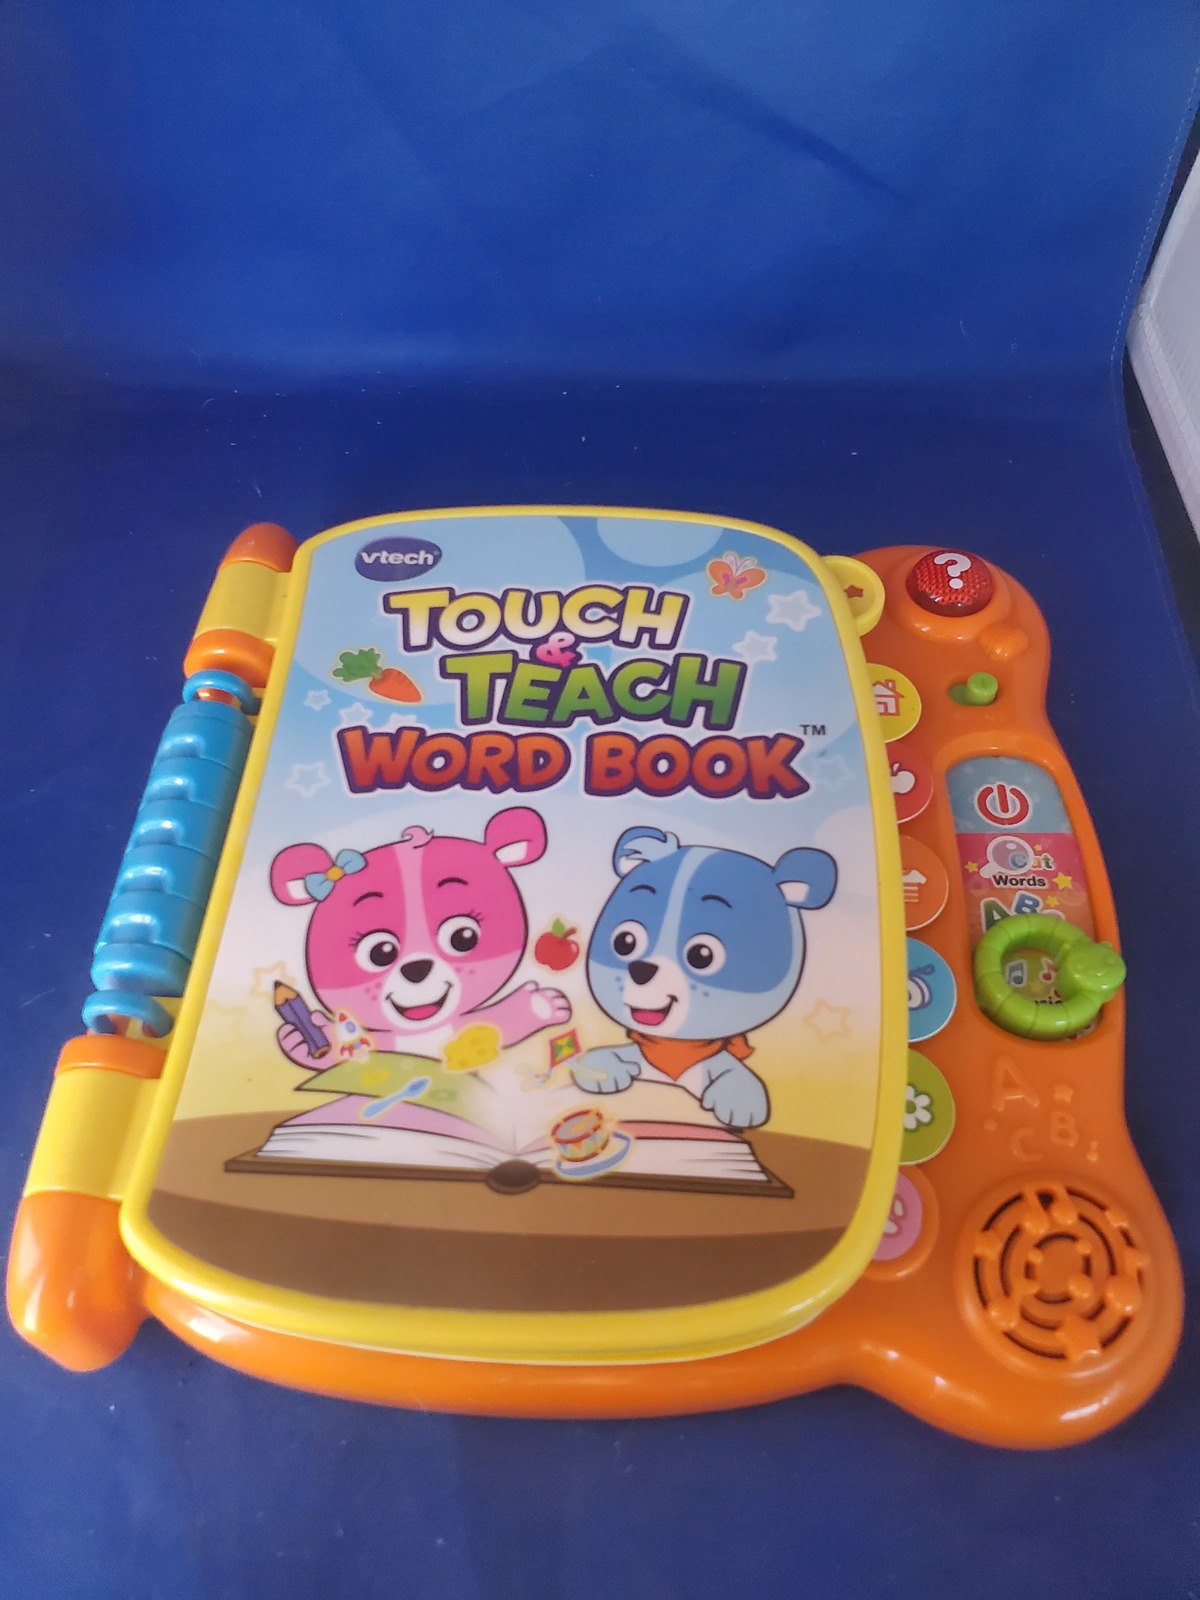 VTech Touch and Teach Word Book Kk4 for sale online 